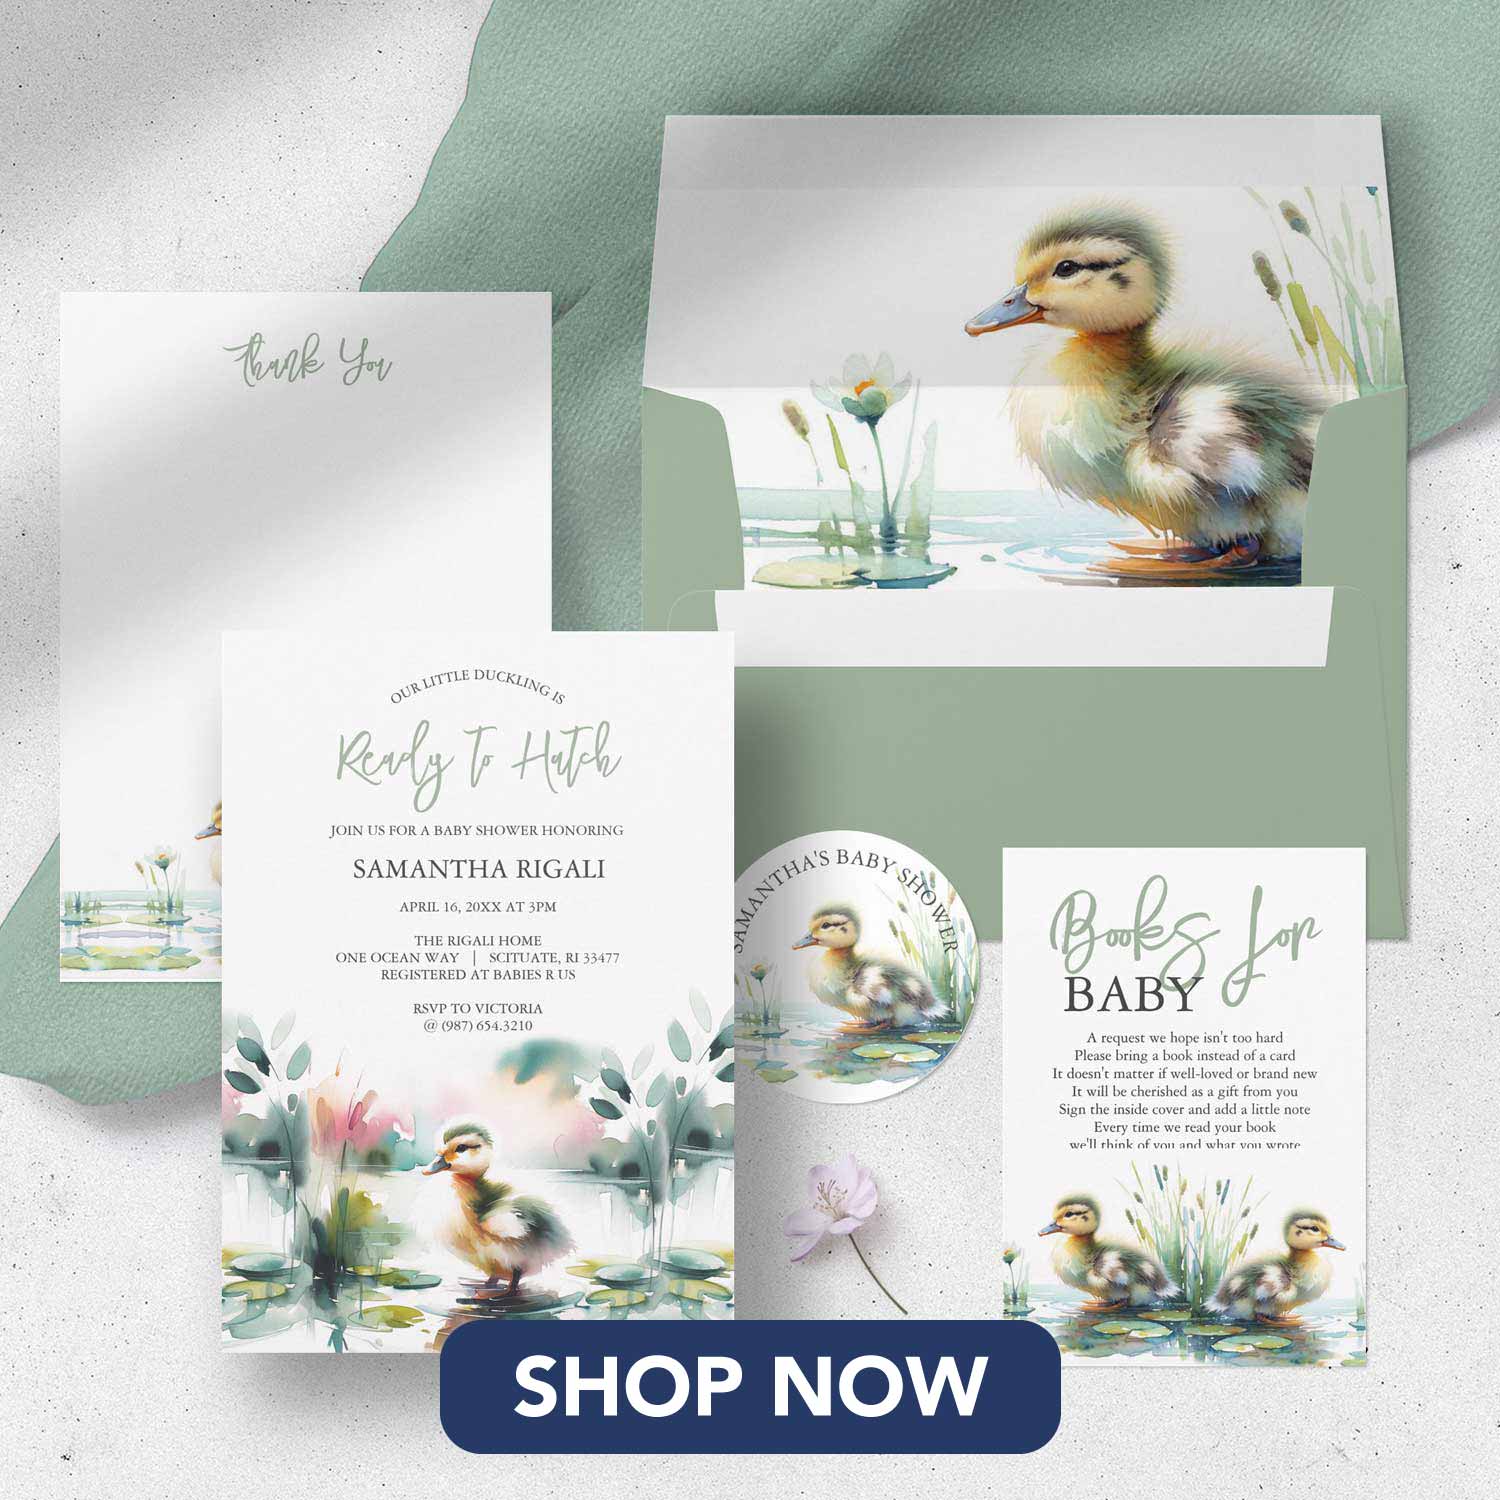 Duck baby shower invitations and stationery. Click to shop.